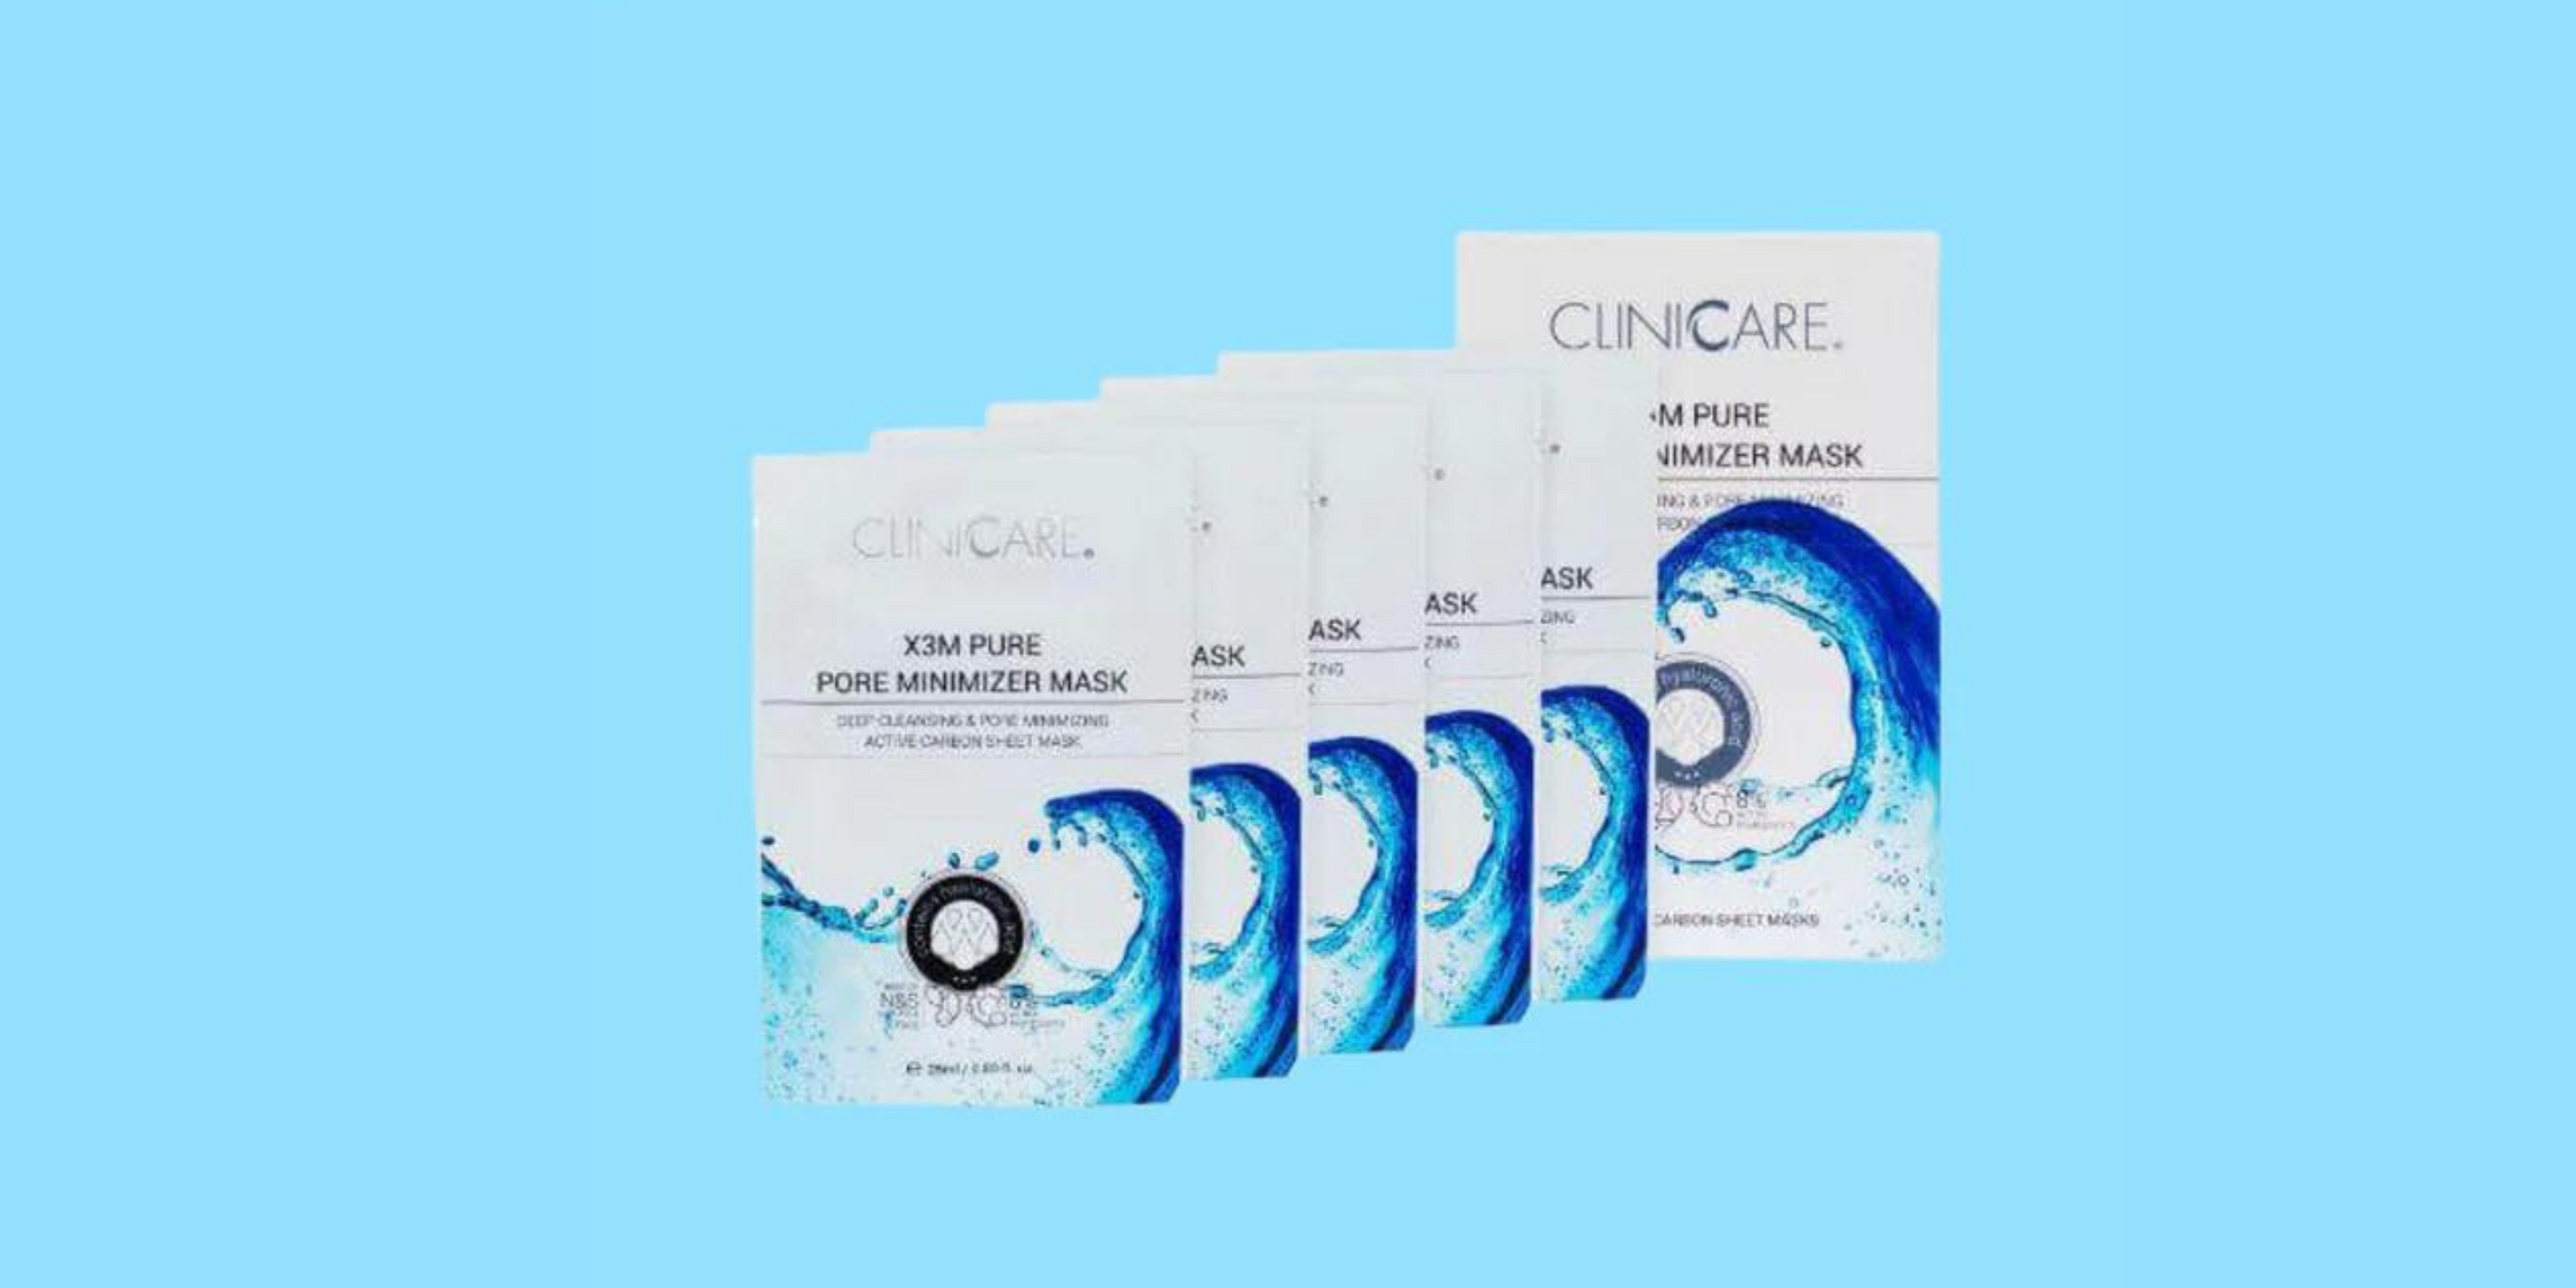 The Pros and Cons of CLINICCARE X3M Pure Pore Minimiser Mask